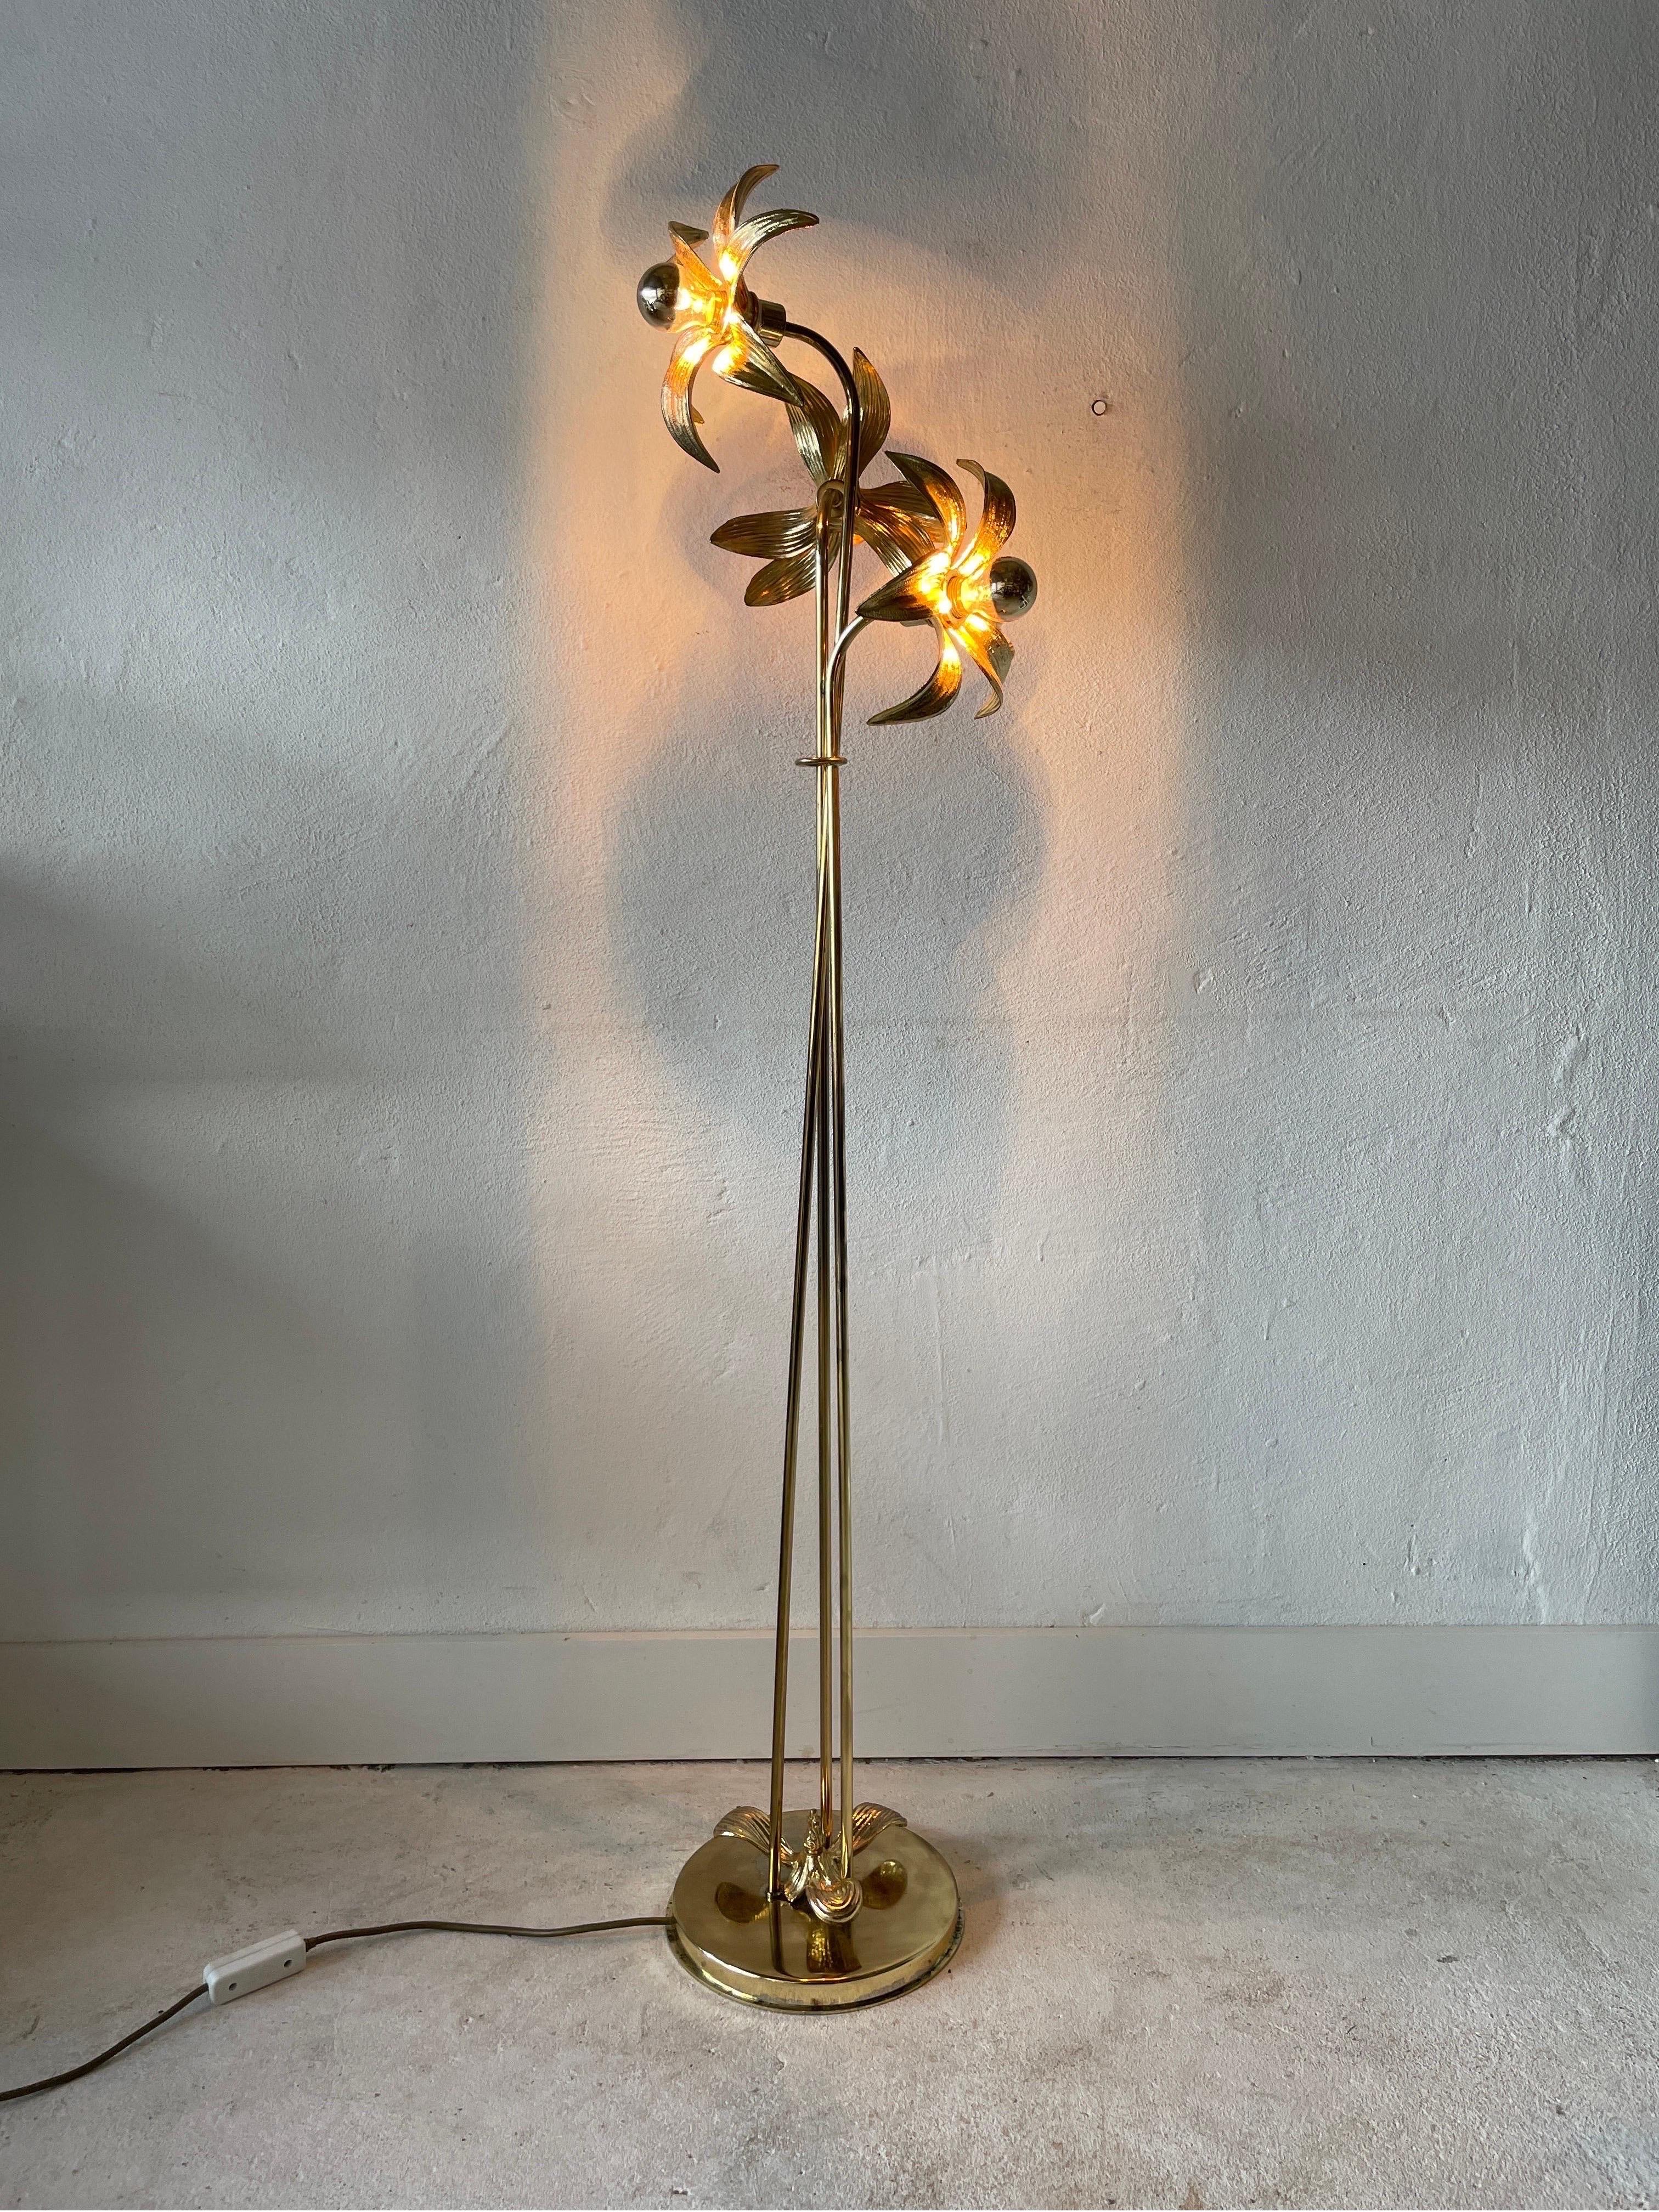 Triple Flower Shade Brass Floor Lamp by Willy Daro for Massive, 1970s, Germany For Sale 2